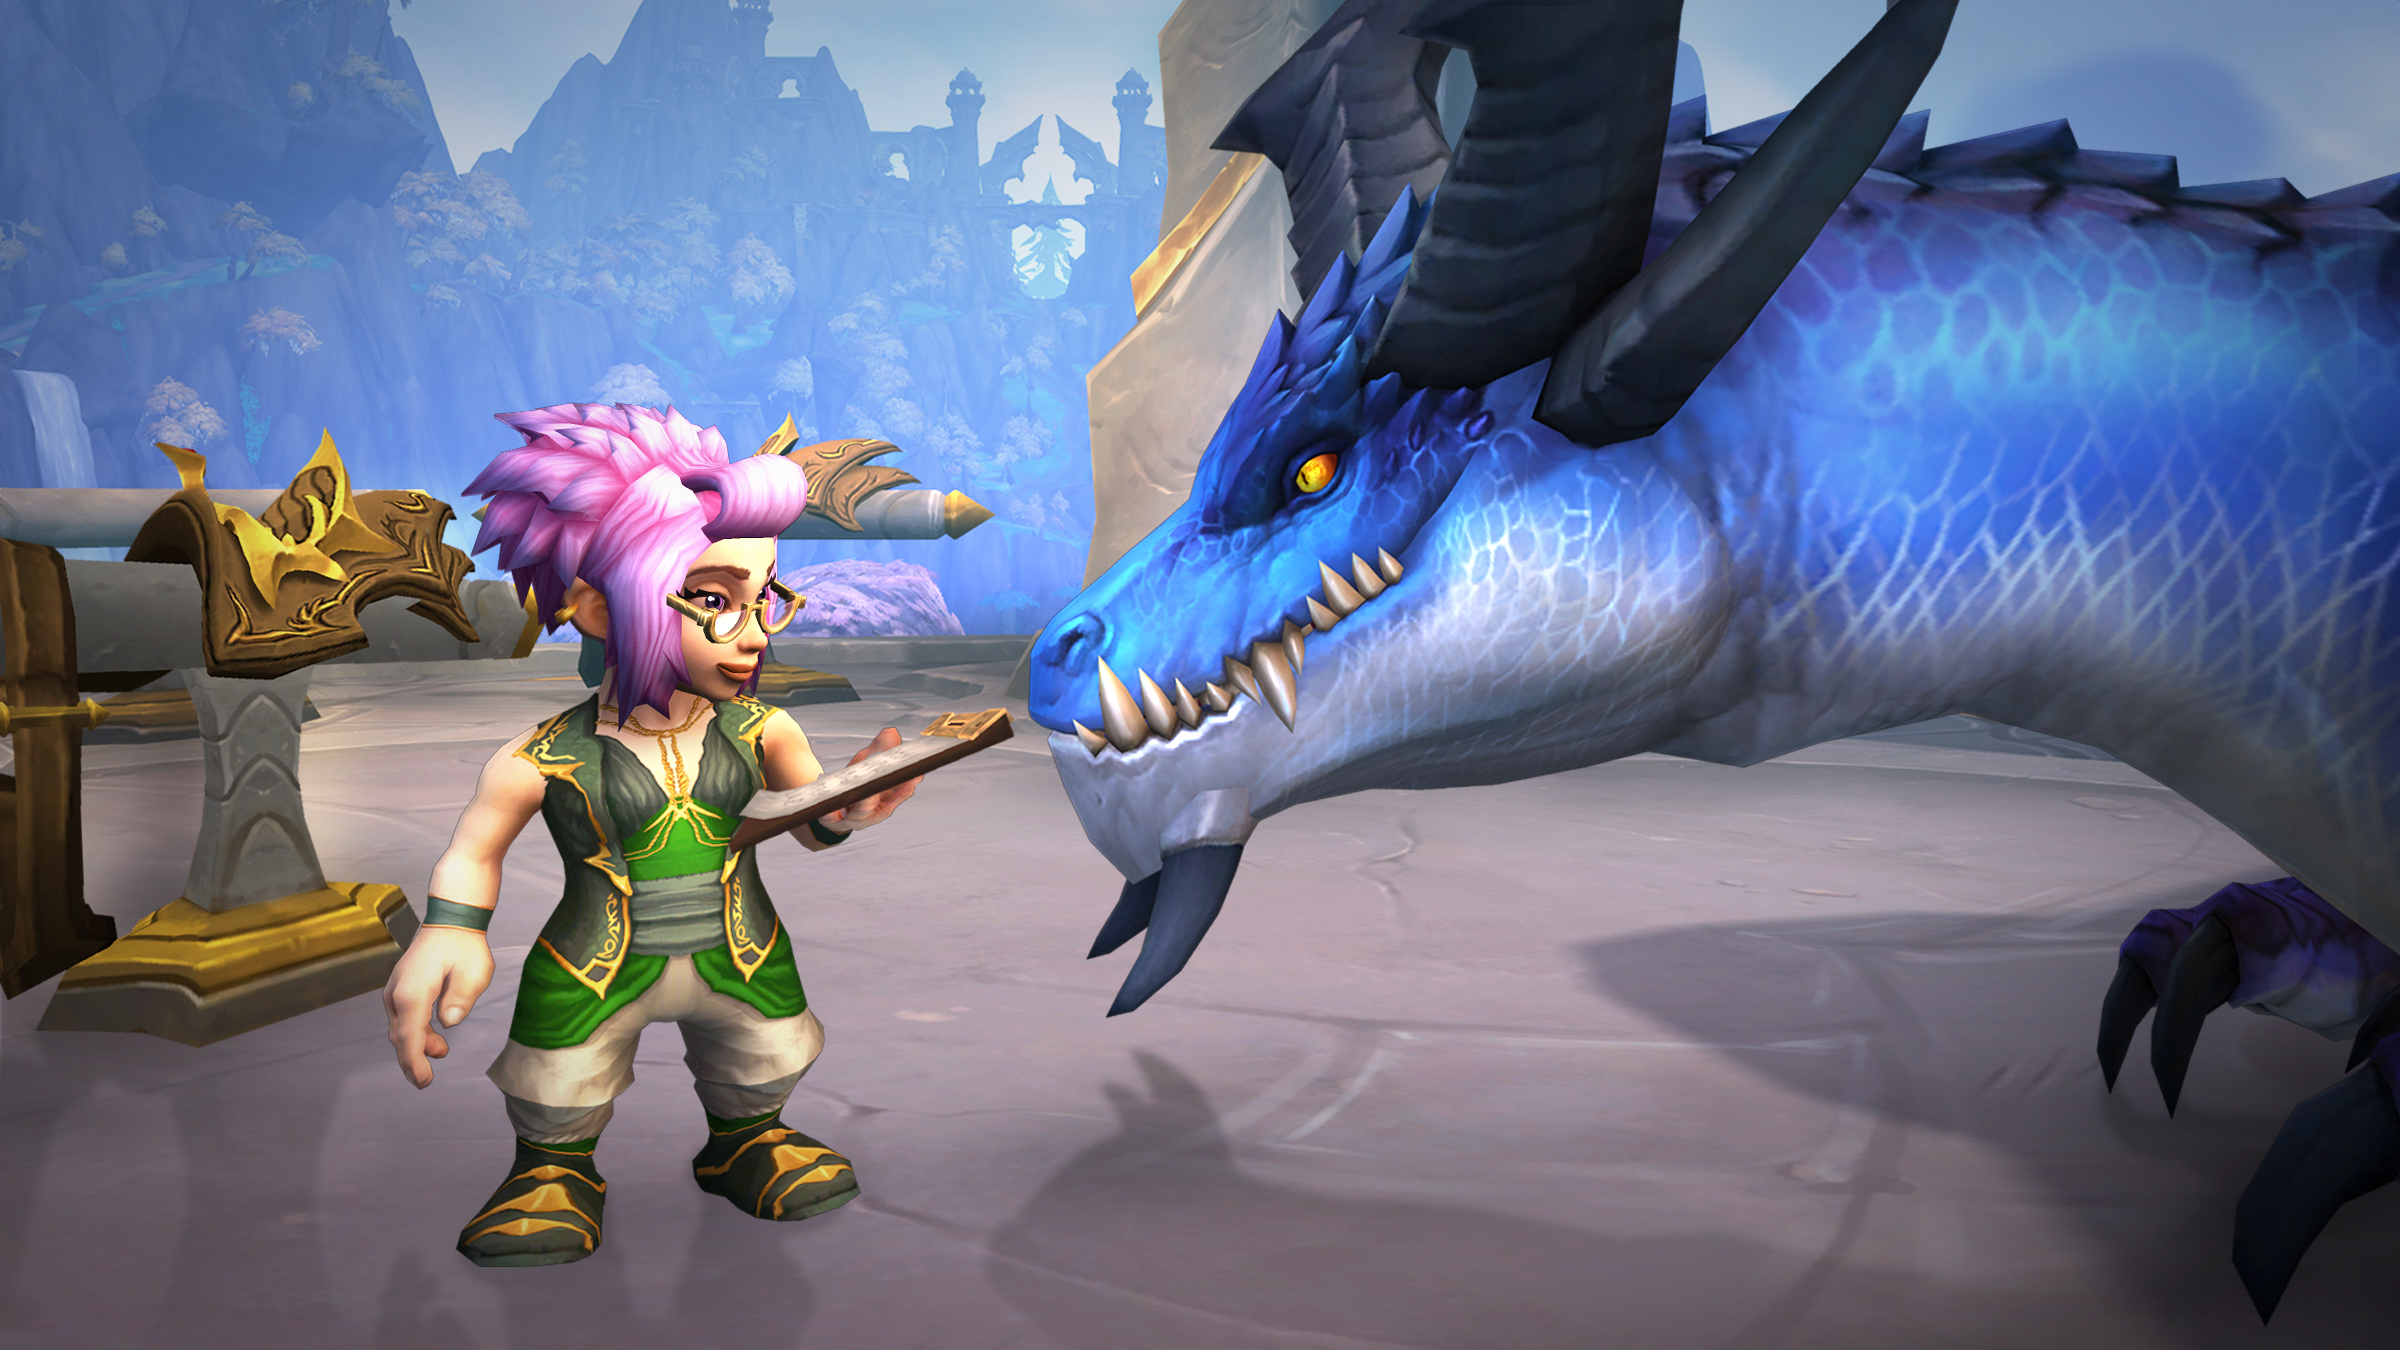 Gnome withy a blue dragon